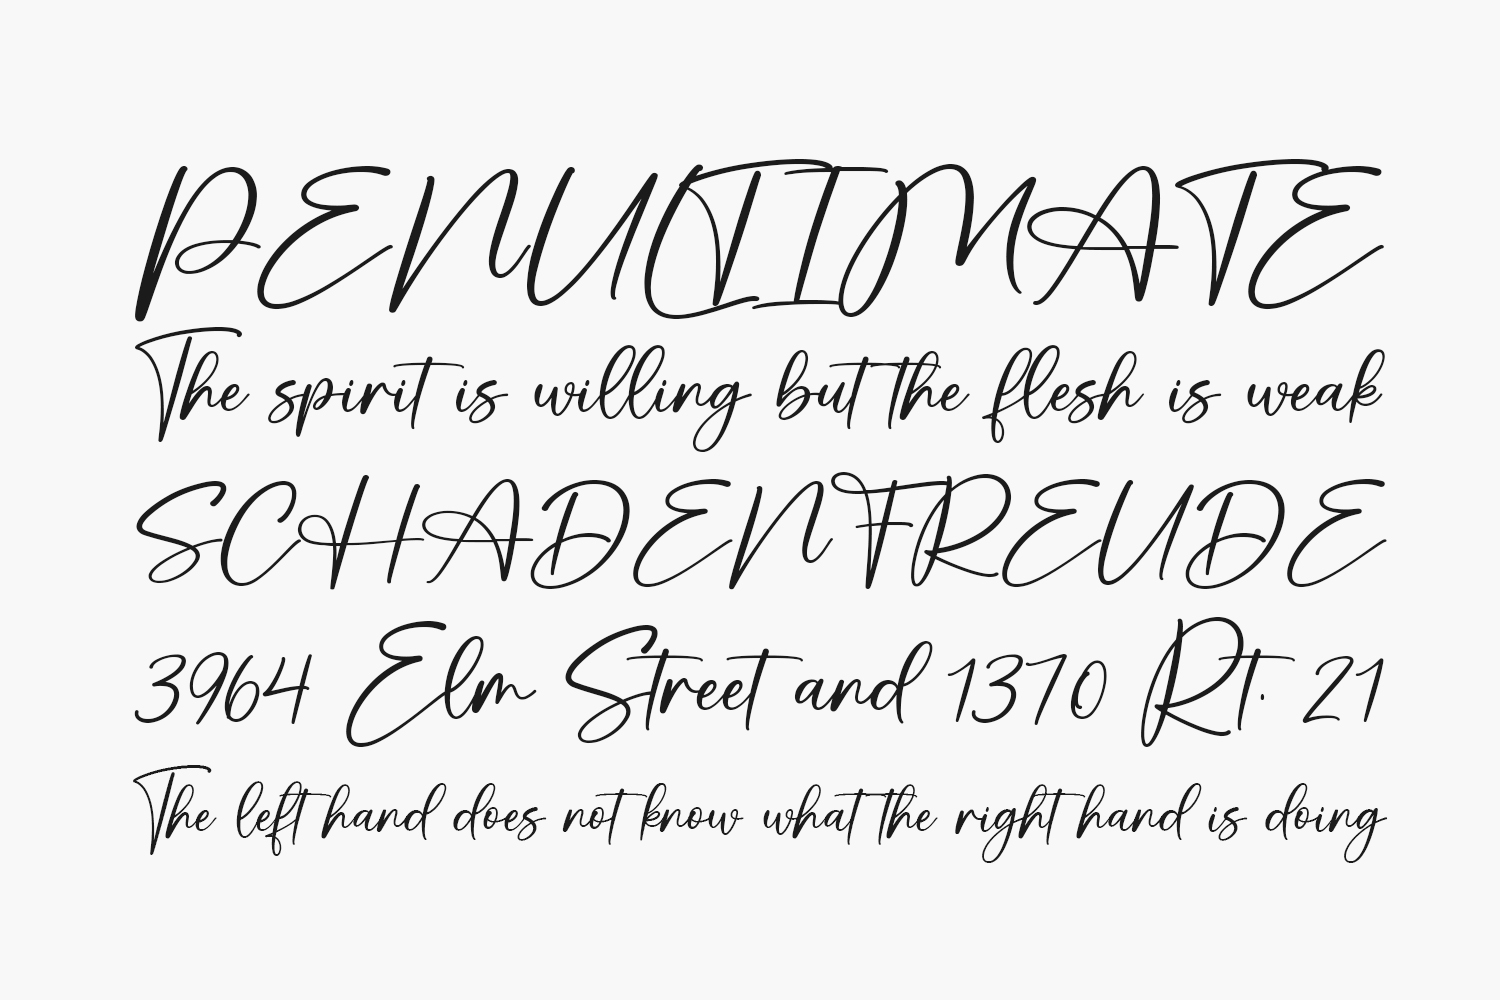 Stay Dreaming Free Font